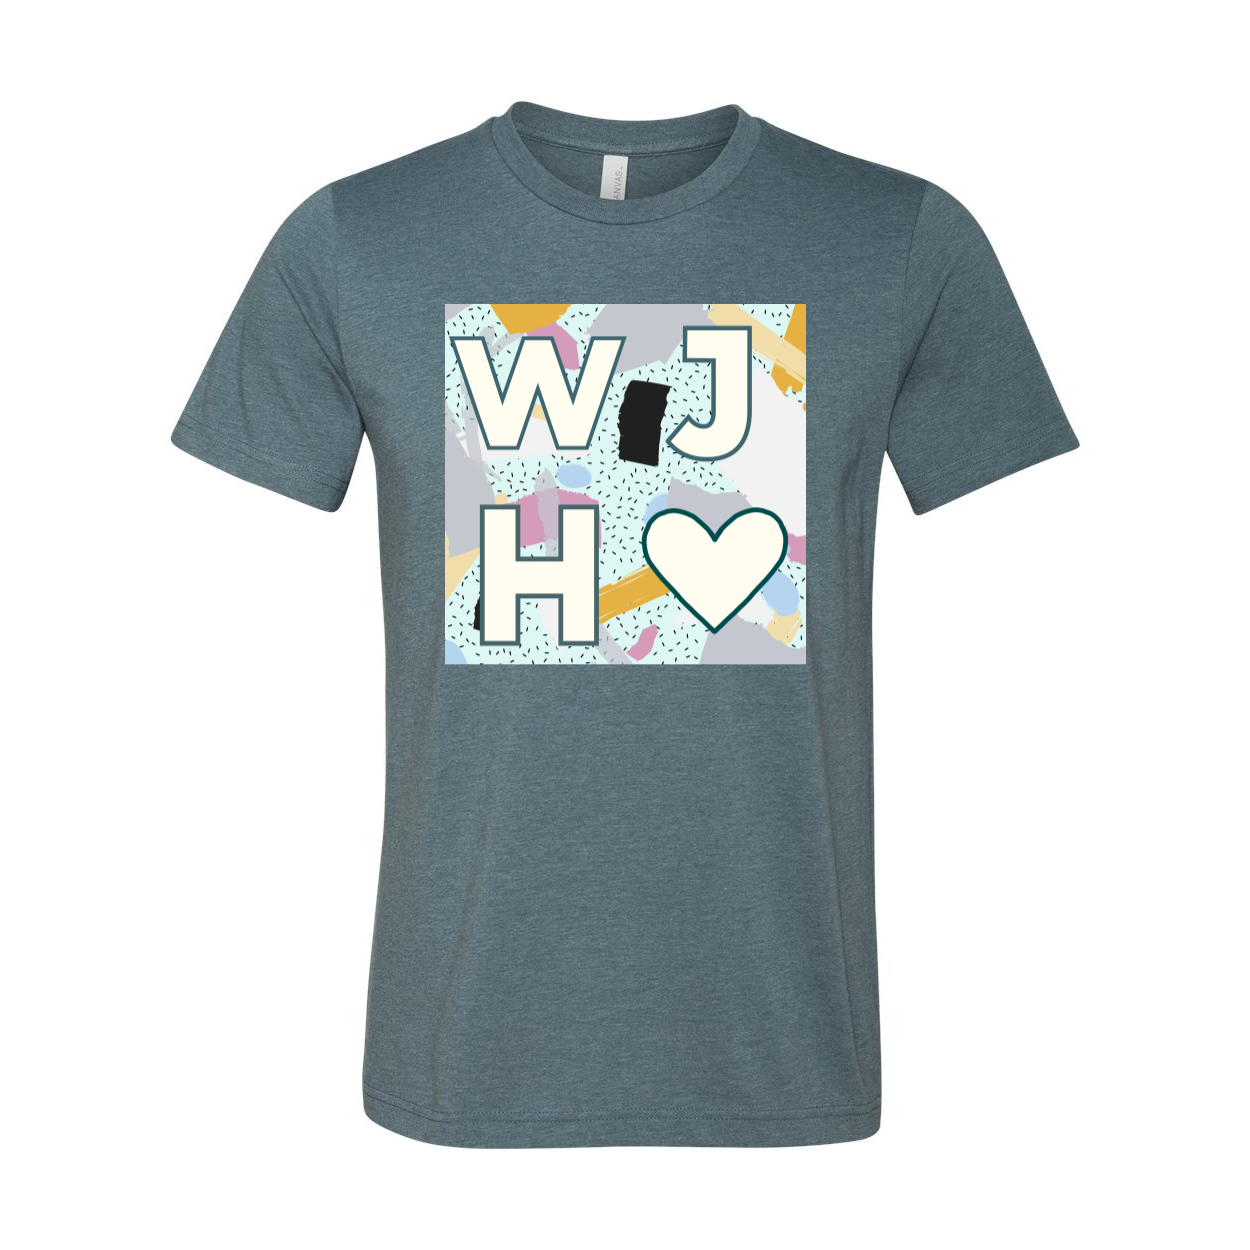 WJHS Patterned Soft Tee